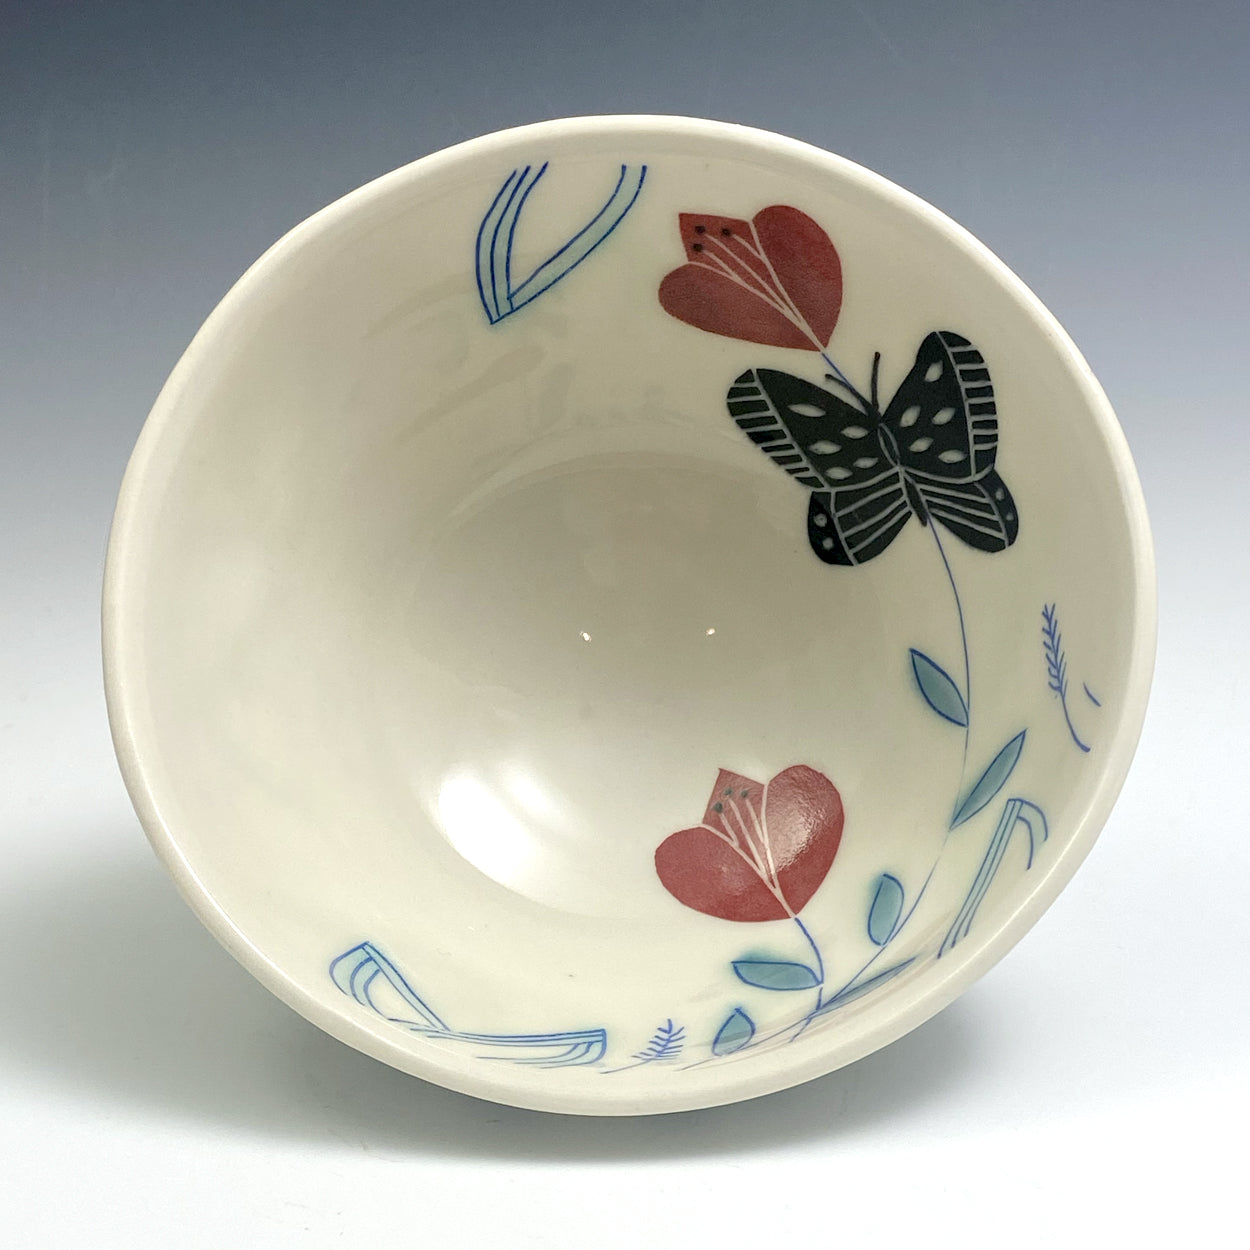 Cereal bowl with black butterfly 03 – Asta Joana Design